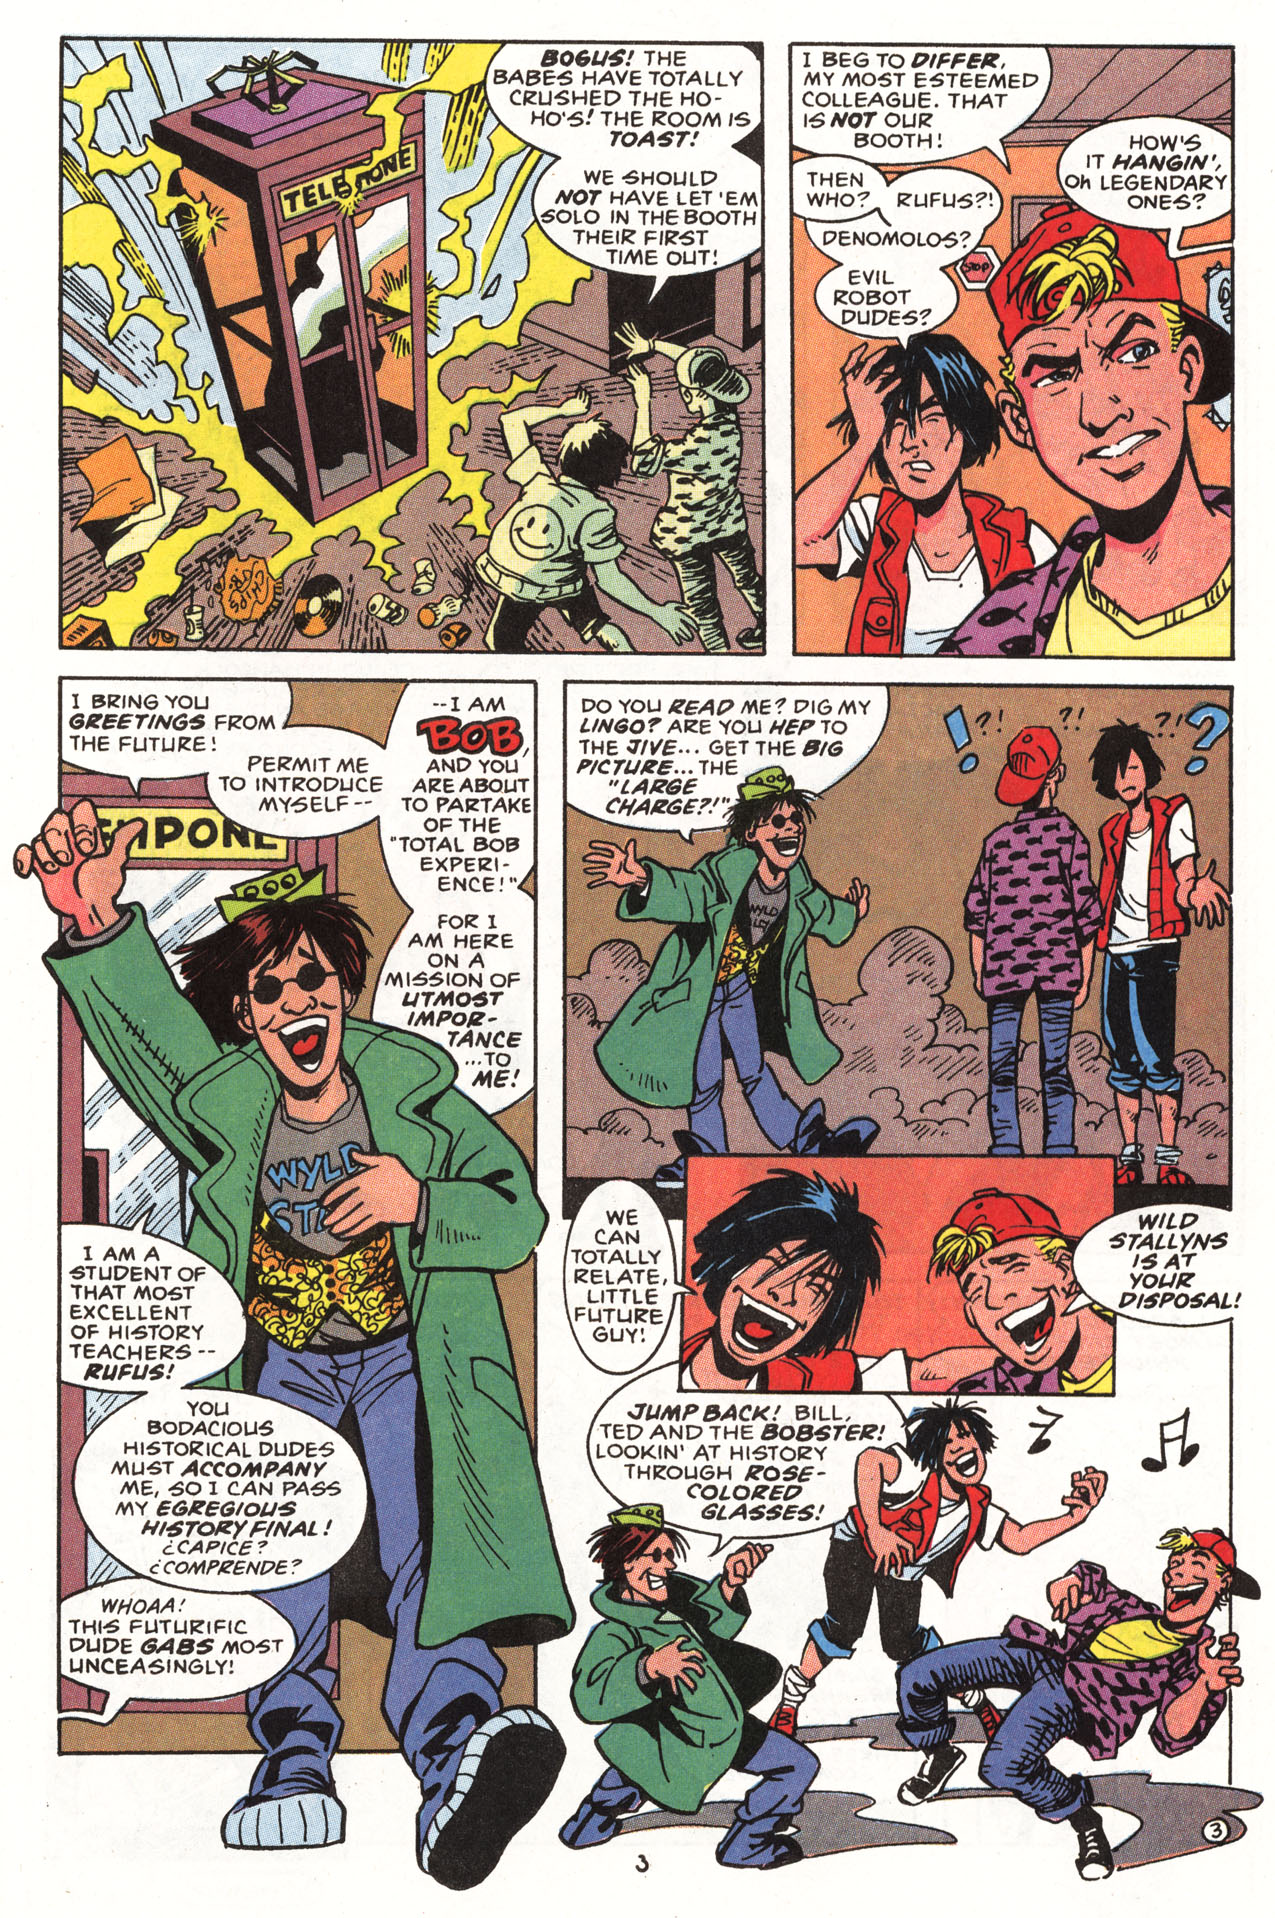 Read online Bill & Ted's Excellent Comic Book comic -  Issue #8 - 5